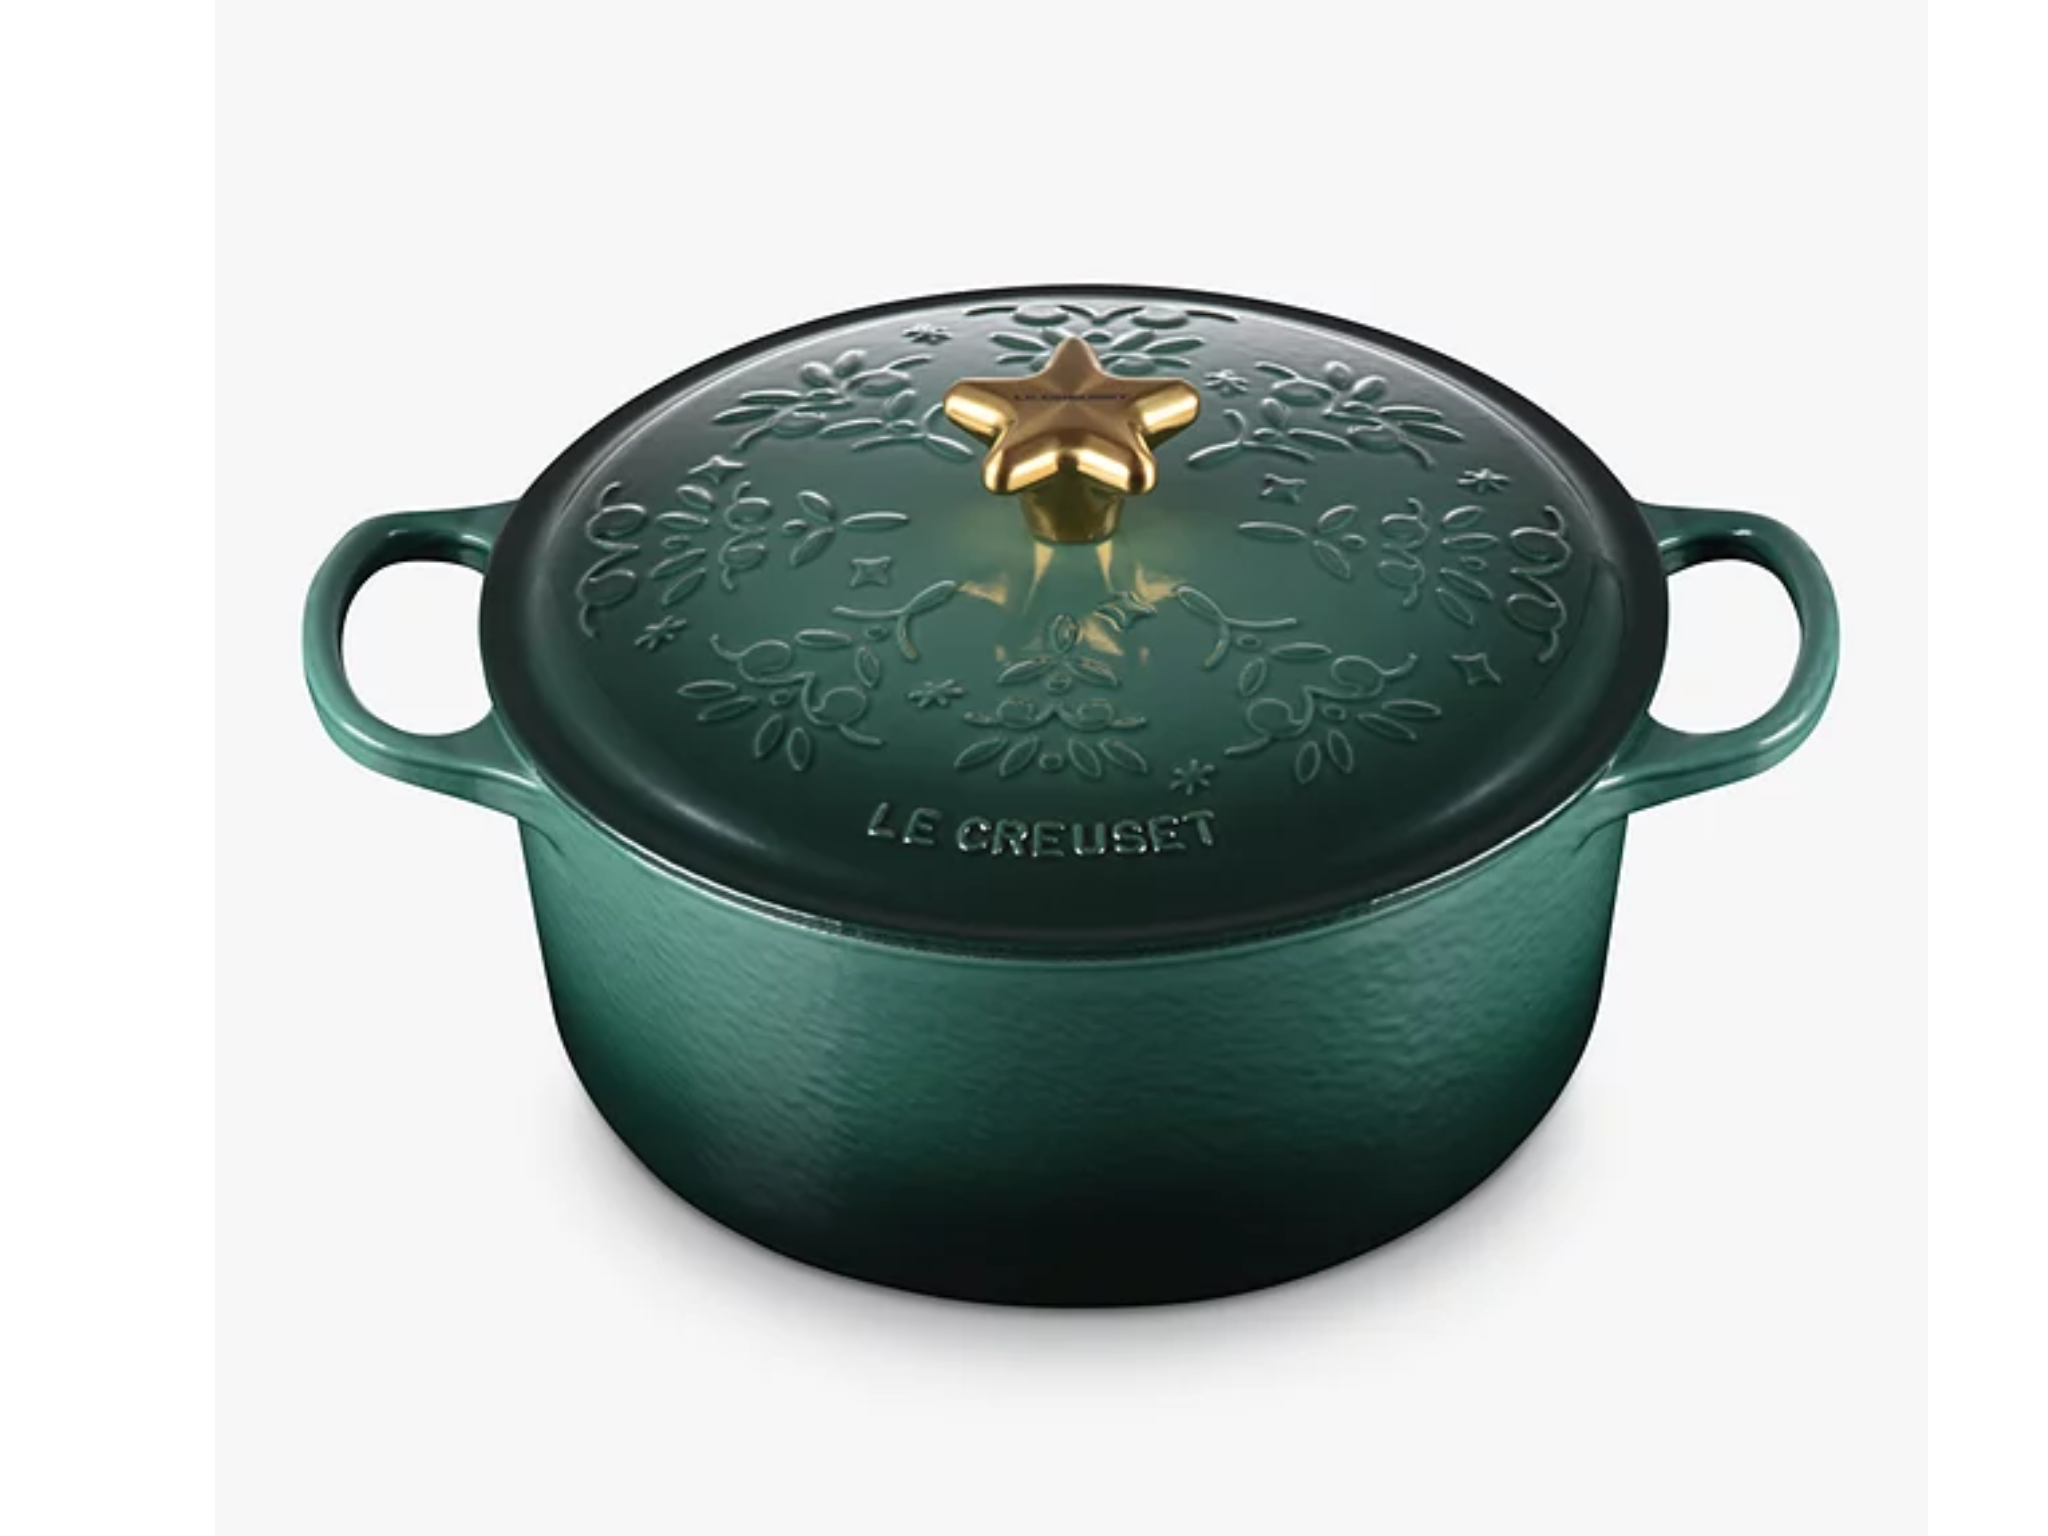 indybest, black friday, le creuset, amazon, black friday, le creuset’s cyber monday sale is here – the best post-black friday deals to shop now